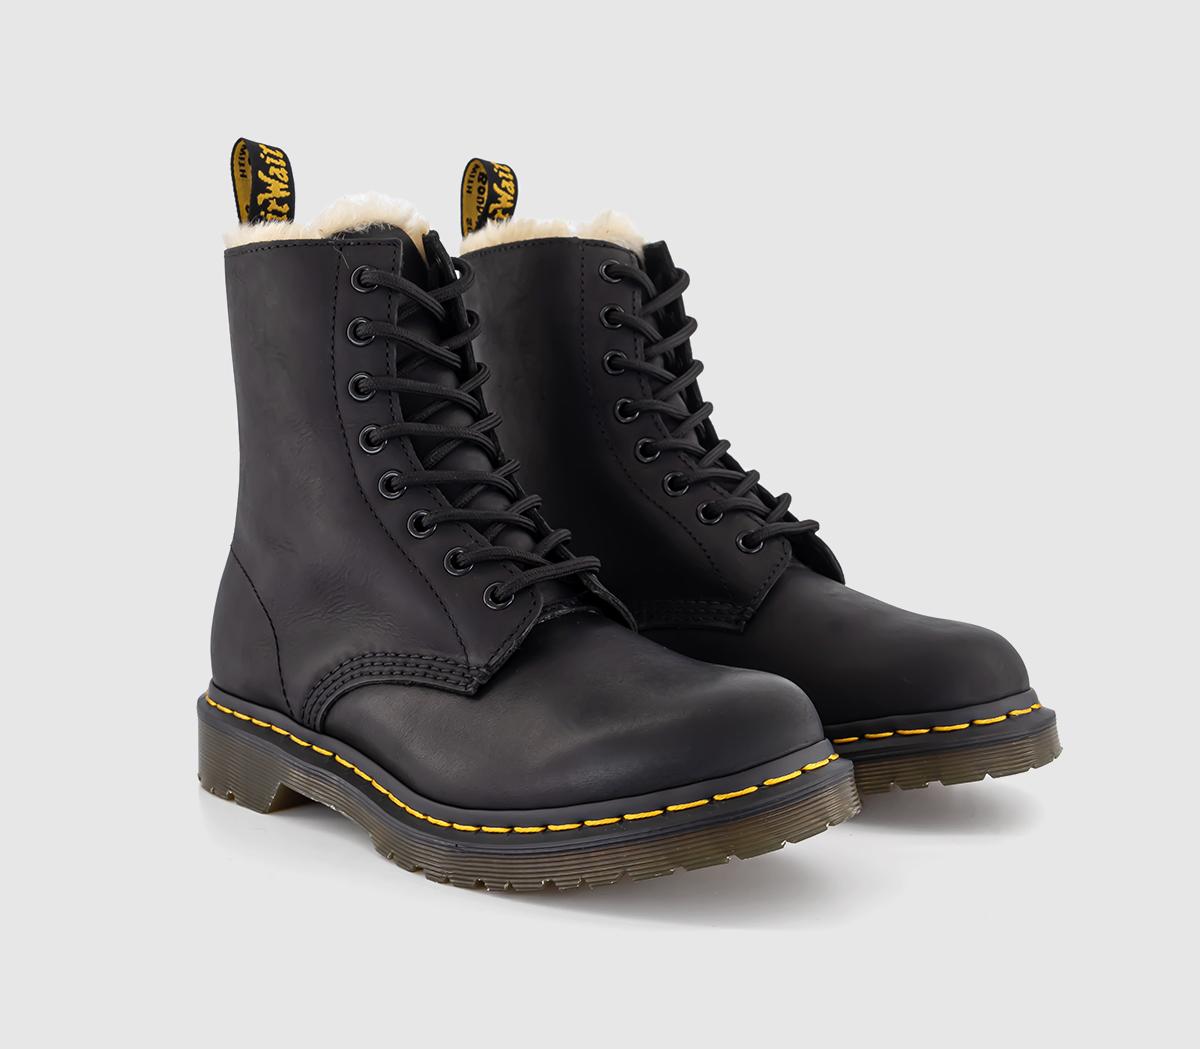 Dr. Martens Womens Serena 8 Eyelet Shearling Boot Black Leather, 3